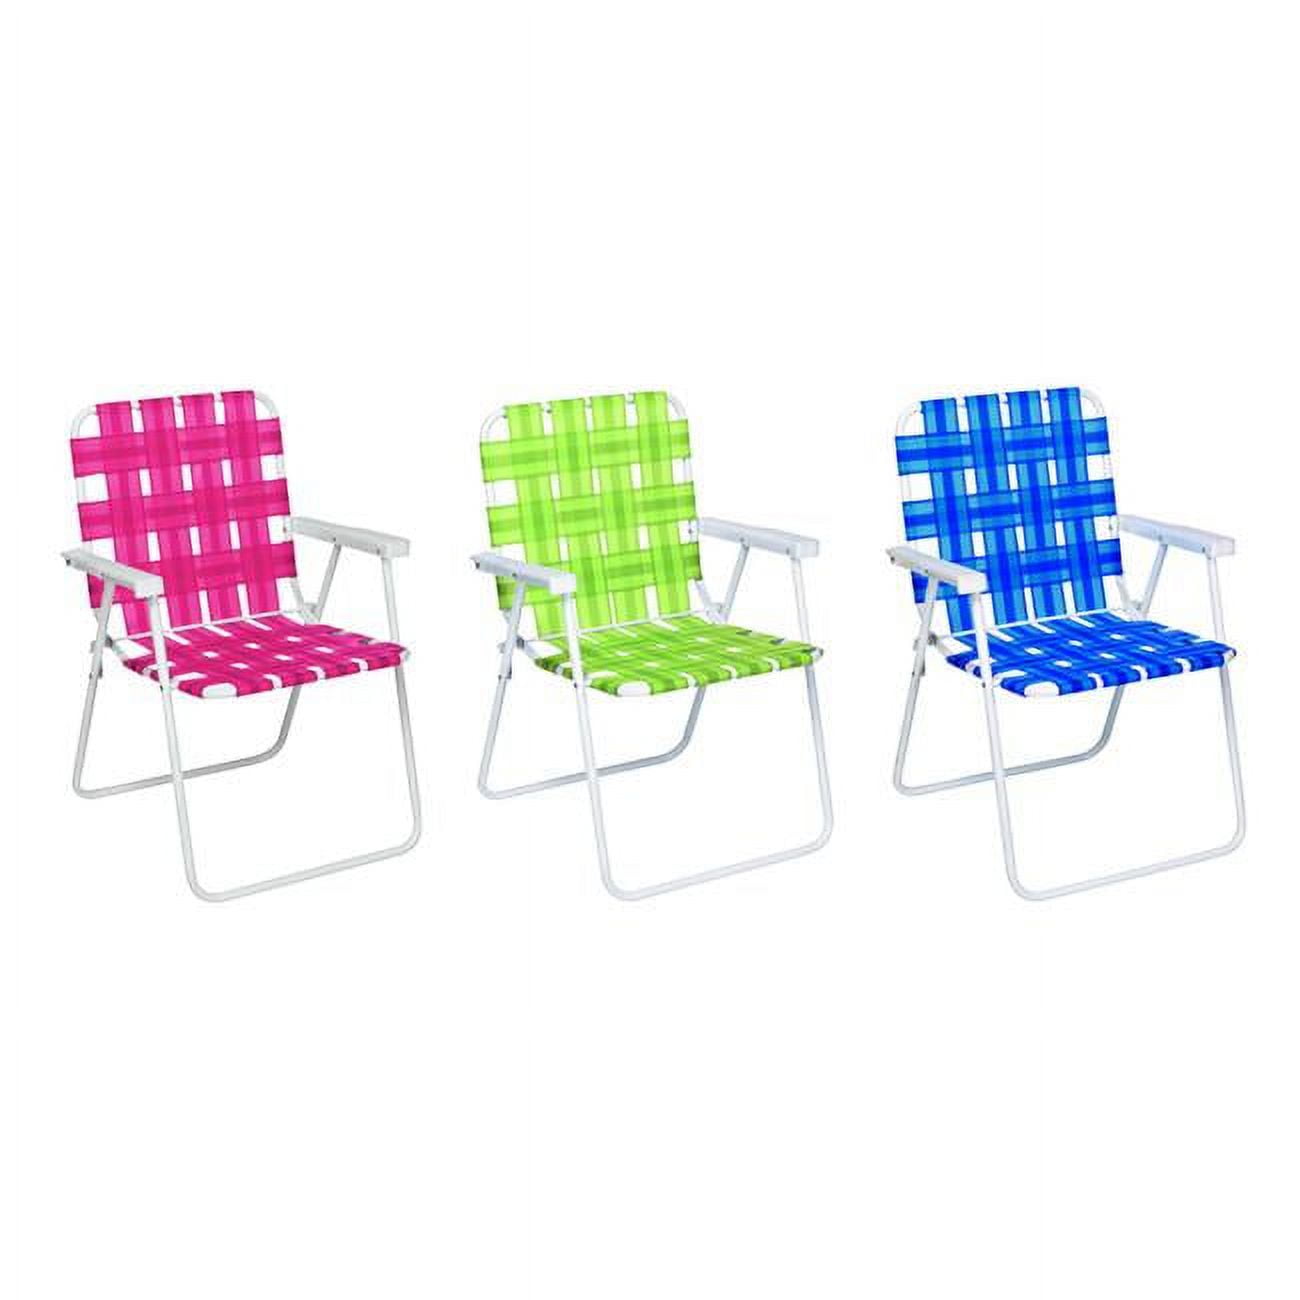 8403057 Folding Web Chair - Case Of 6